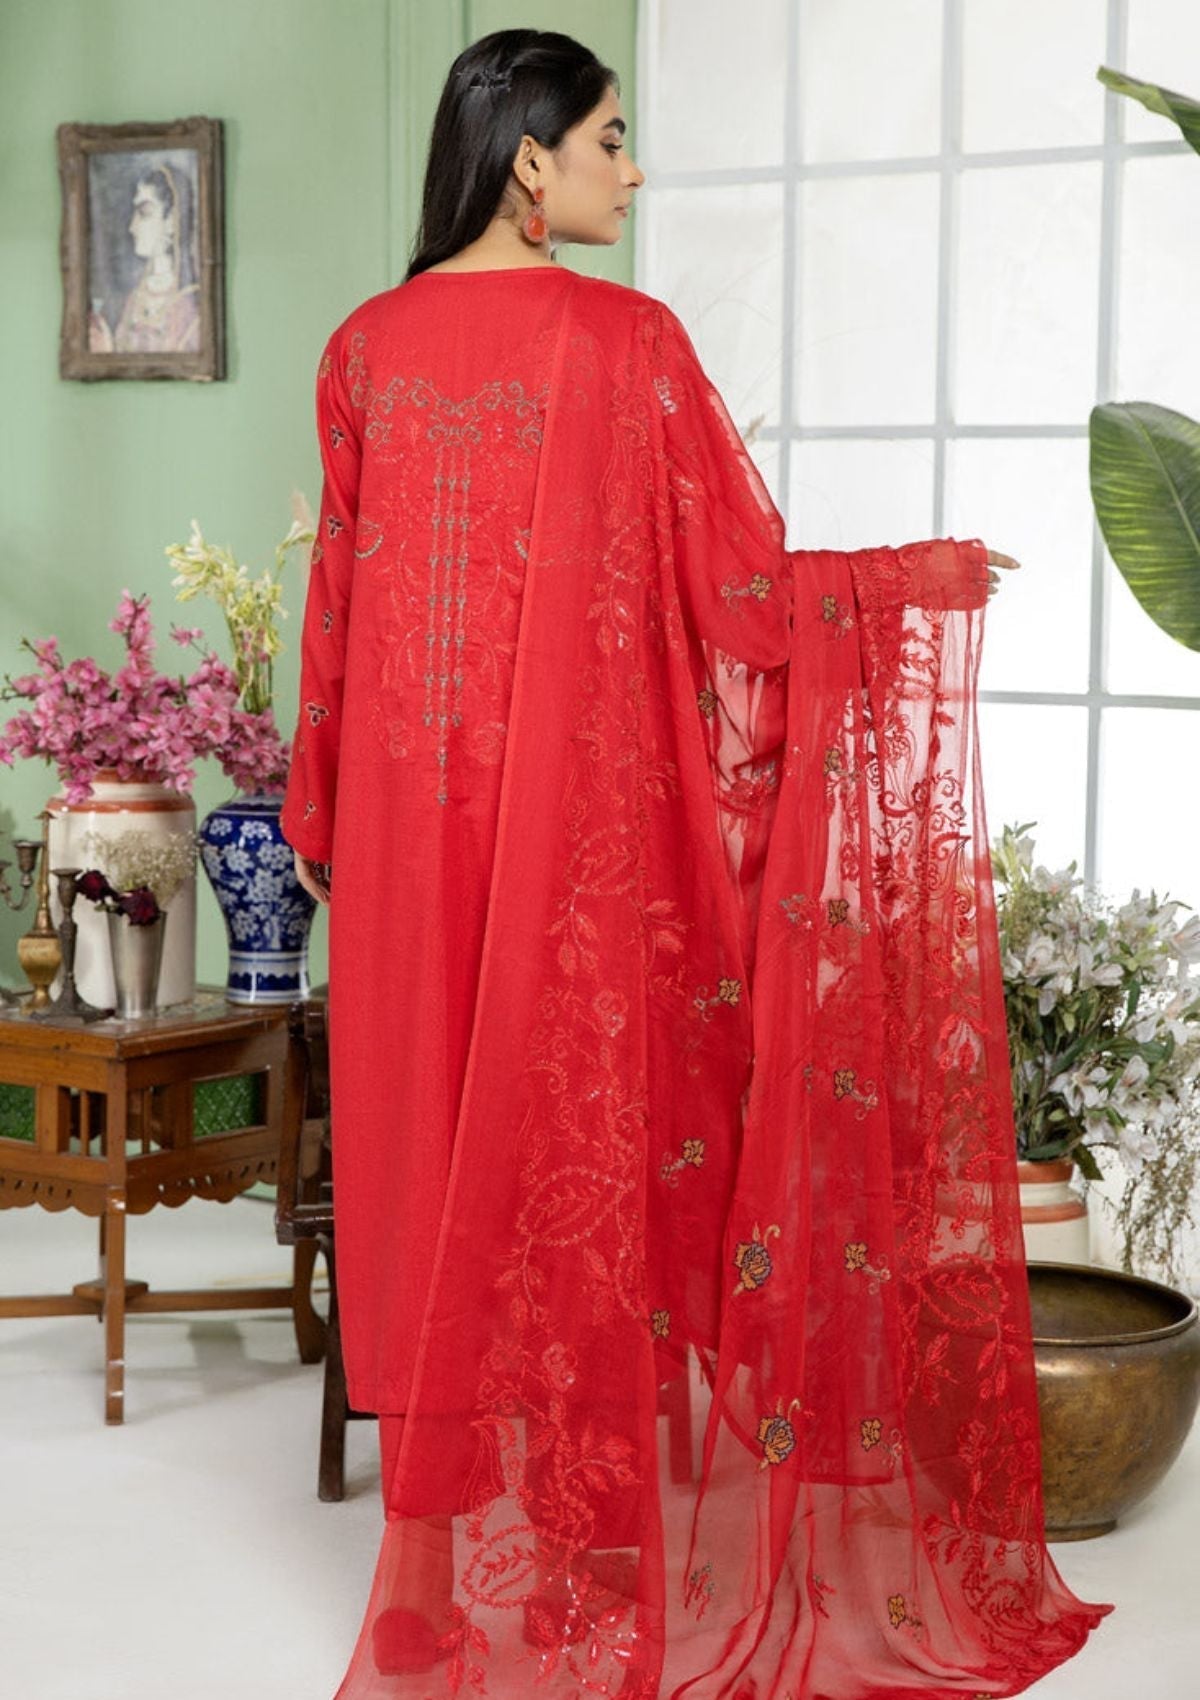 Winter Collection - Marjjan - SKC#22- Red available at Saleem Fabrics Traditions